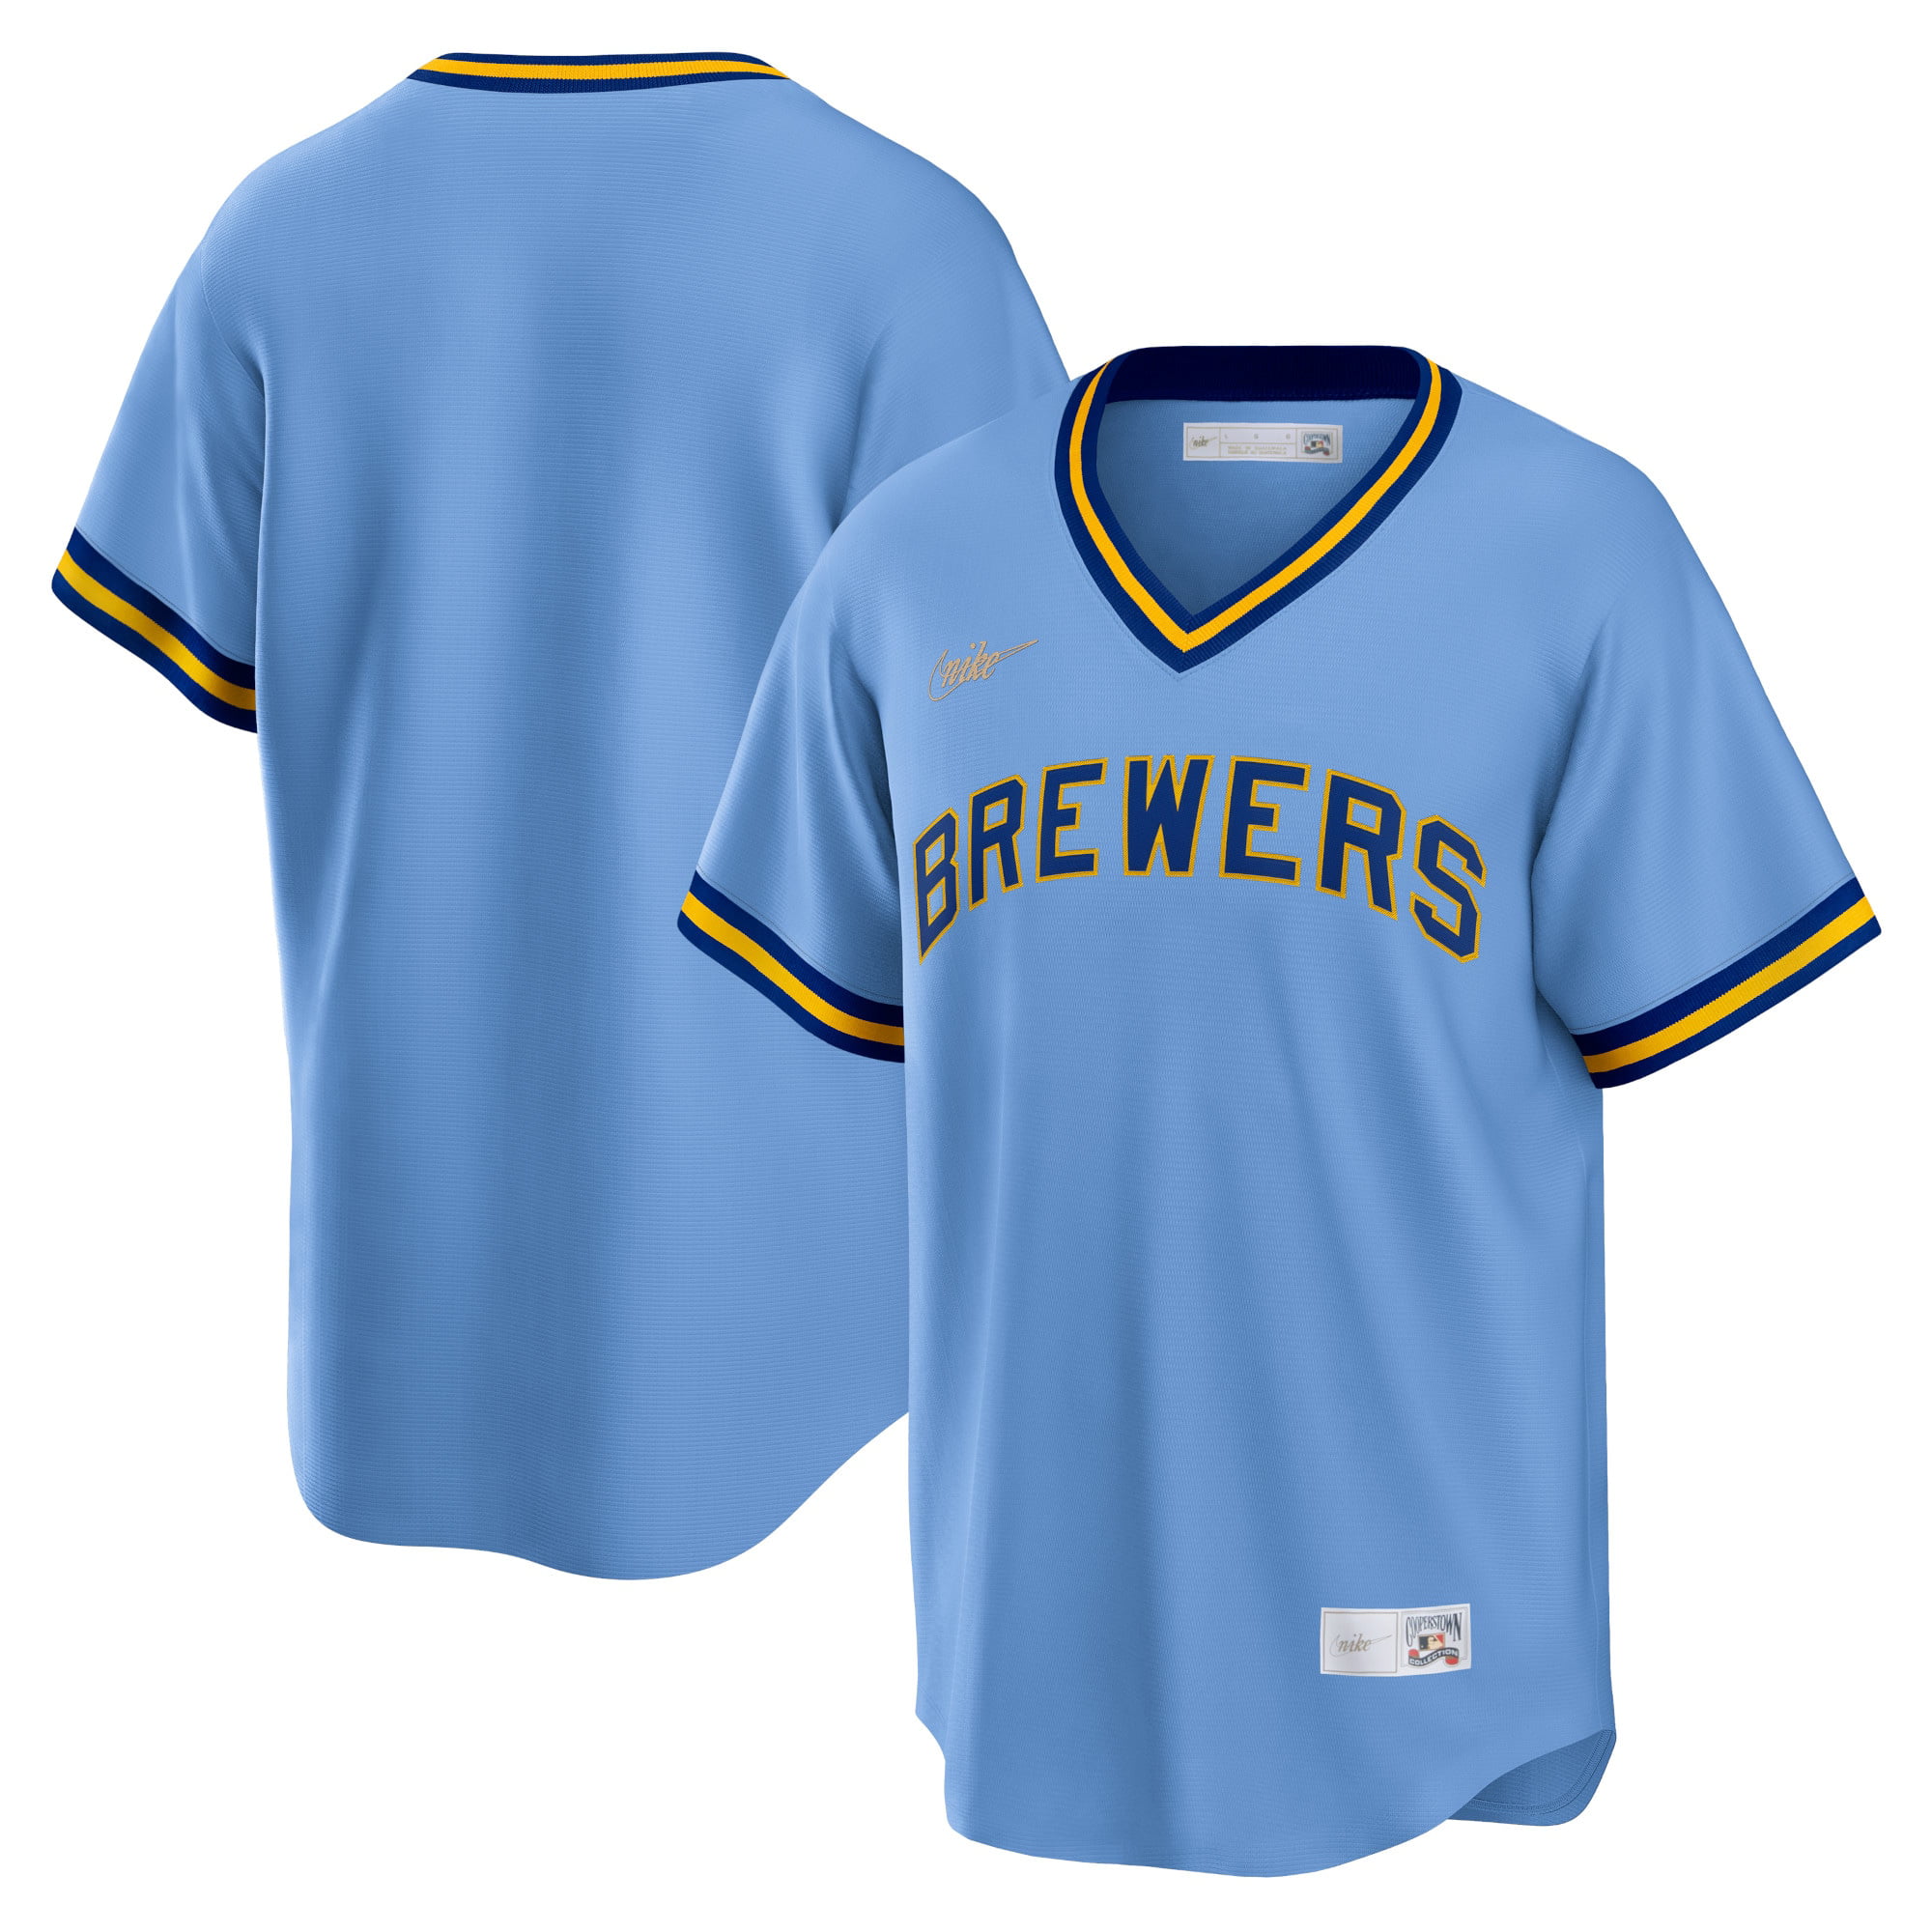 Milwaukee Brewers - The Brewers are wearing these uniforms today.